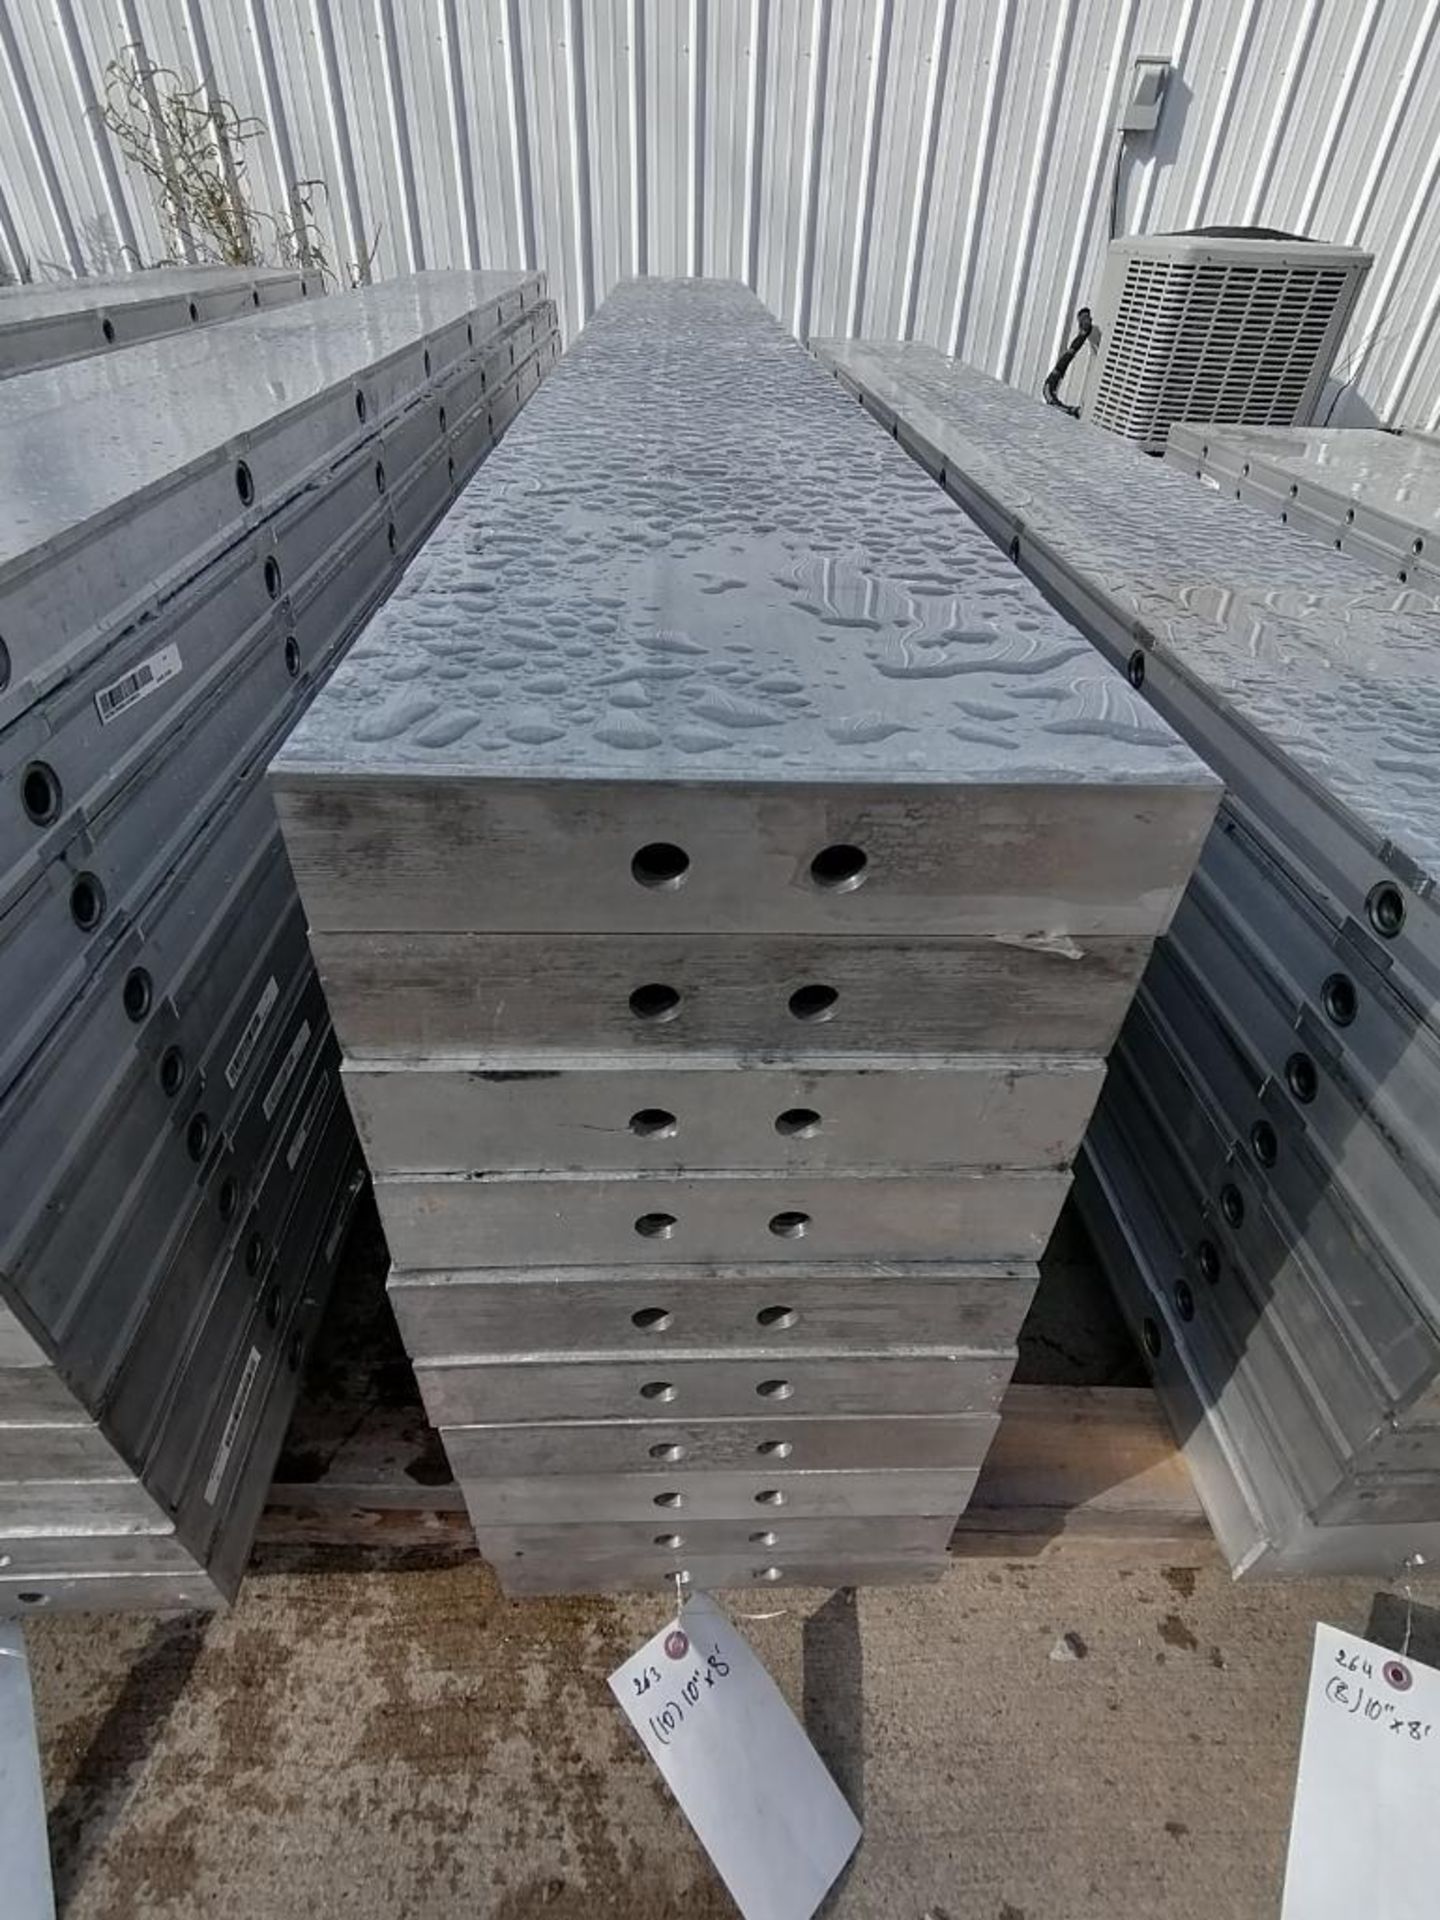 (10) 10" x 8' NEW Badger Smooth Aluminum Concrete Forms 6-12 Hole Pattern. Located in Mt.